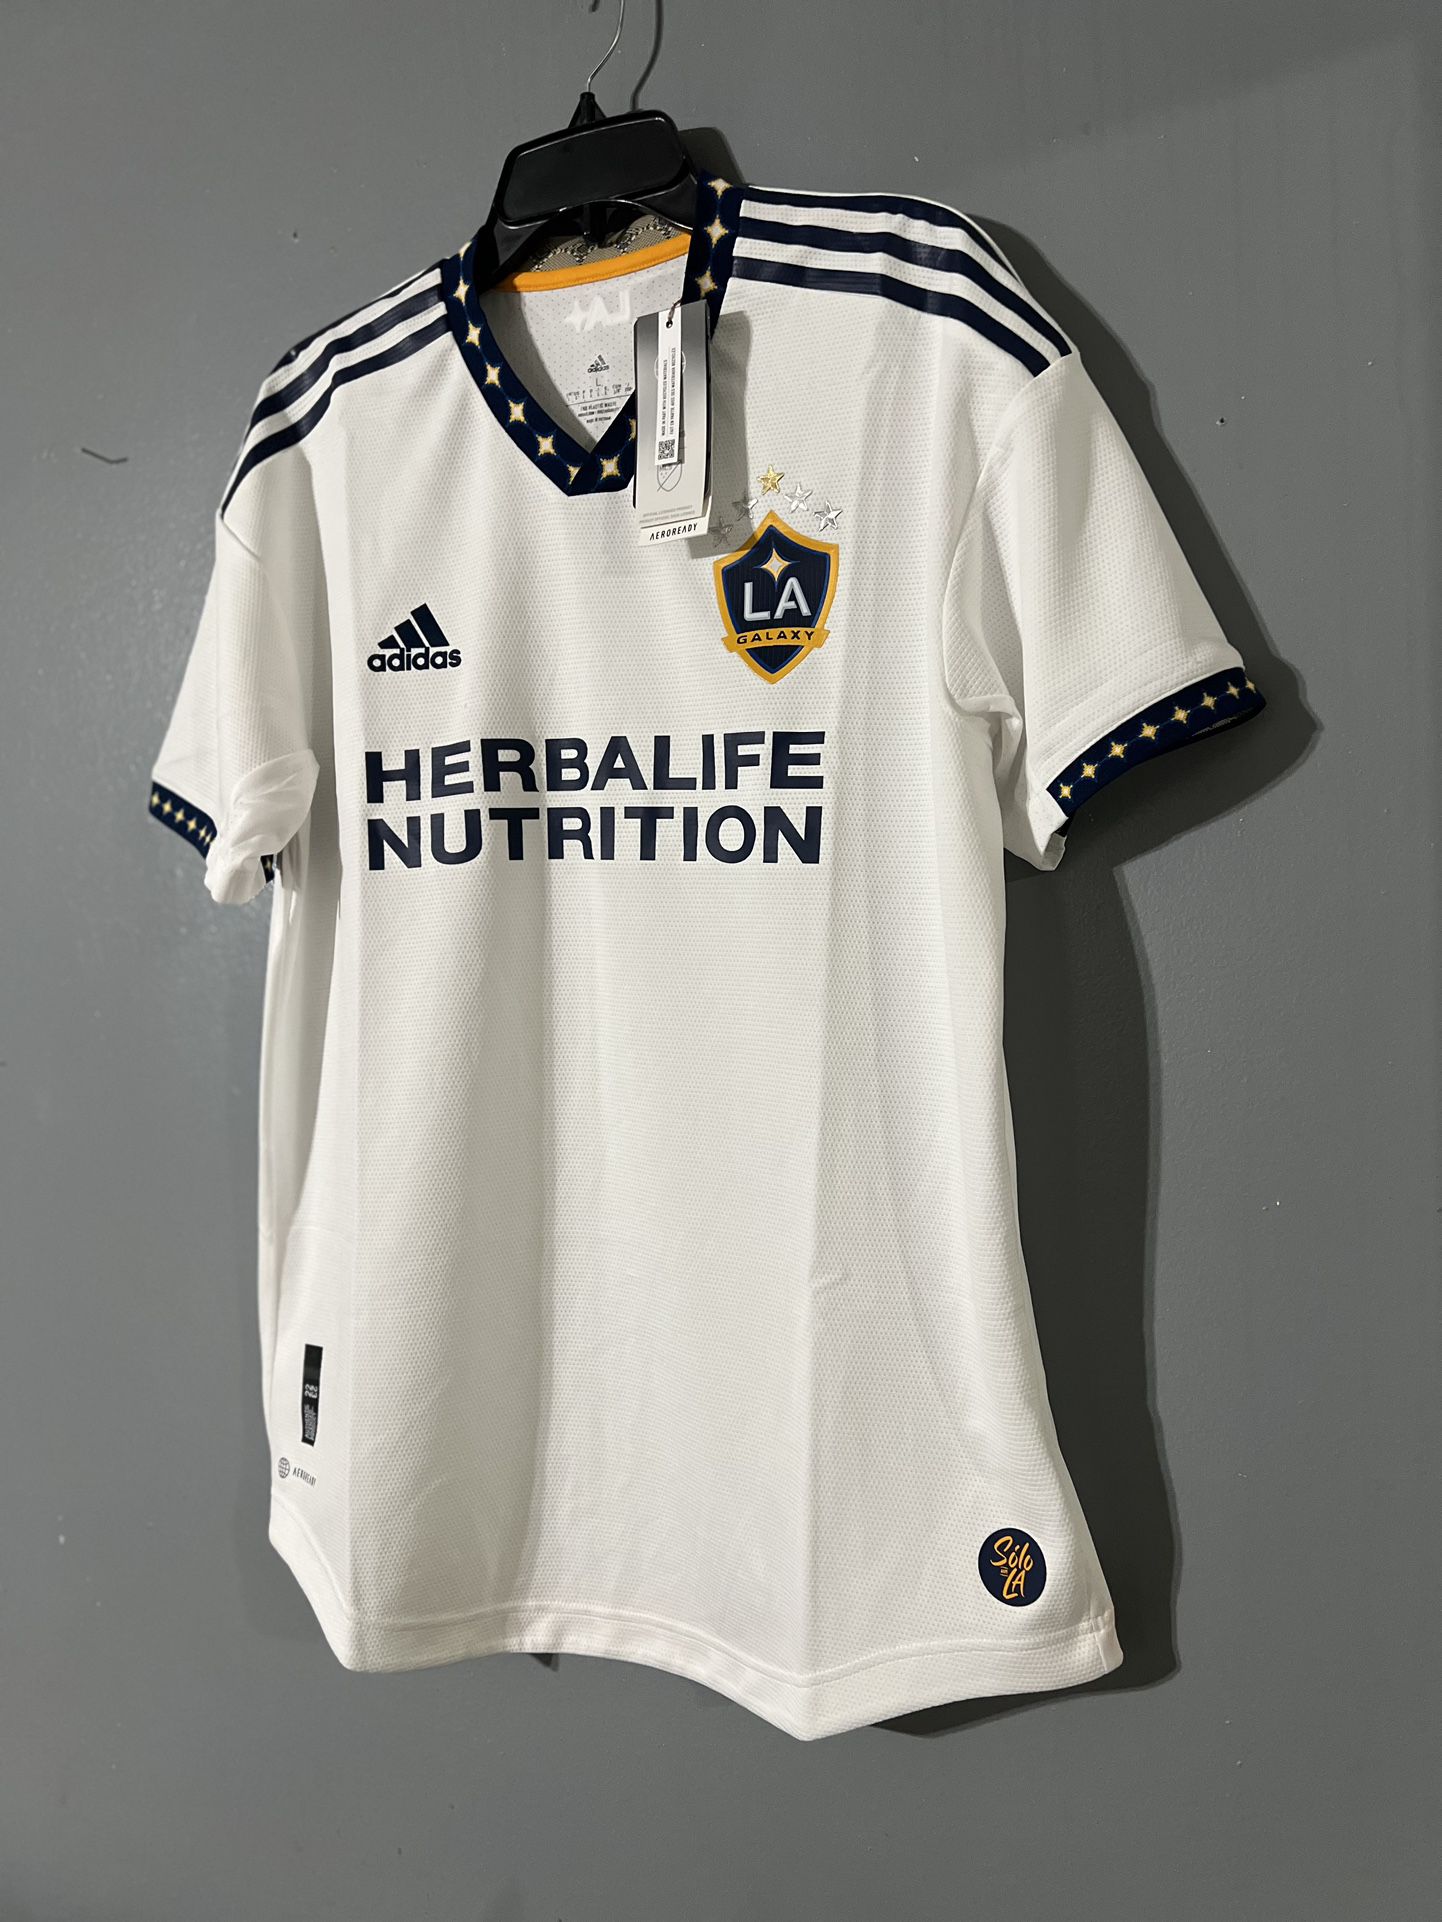 LA GALAXY AUTHENTIC HOME JERSEY for Sale in Baldwin Hills